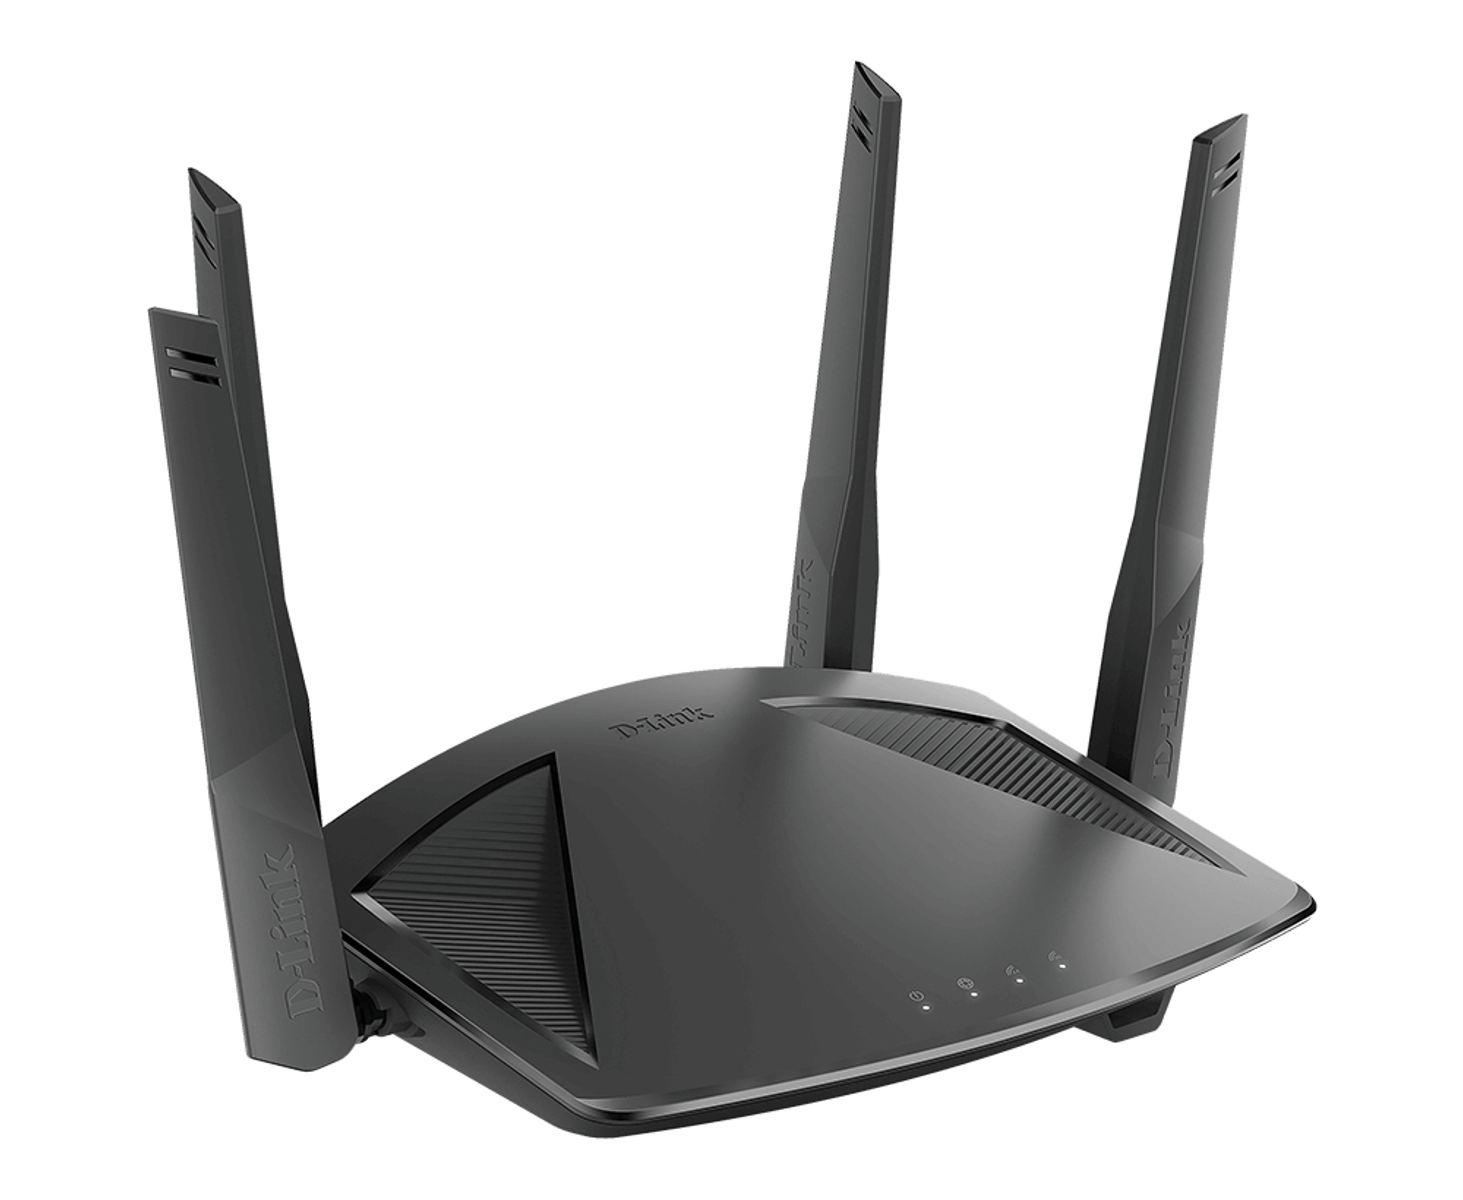 D-LINK AX1800 EXO 6 Router ROUTER WI-FI